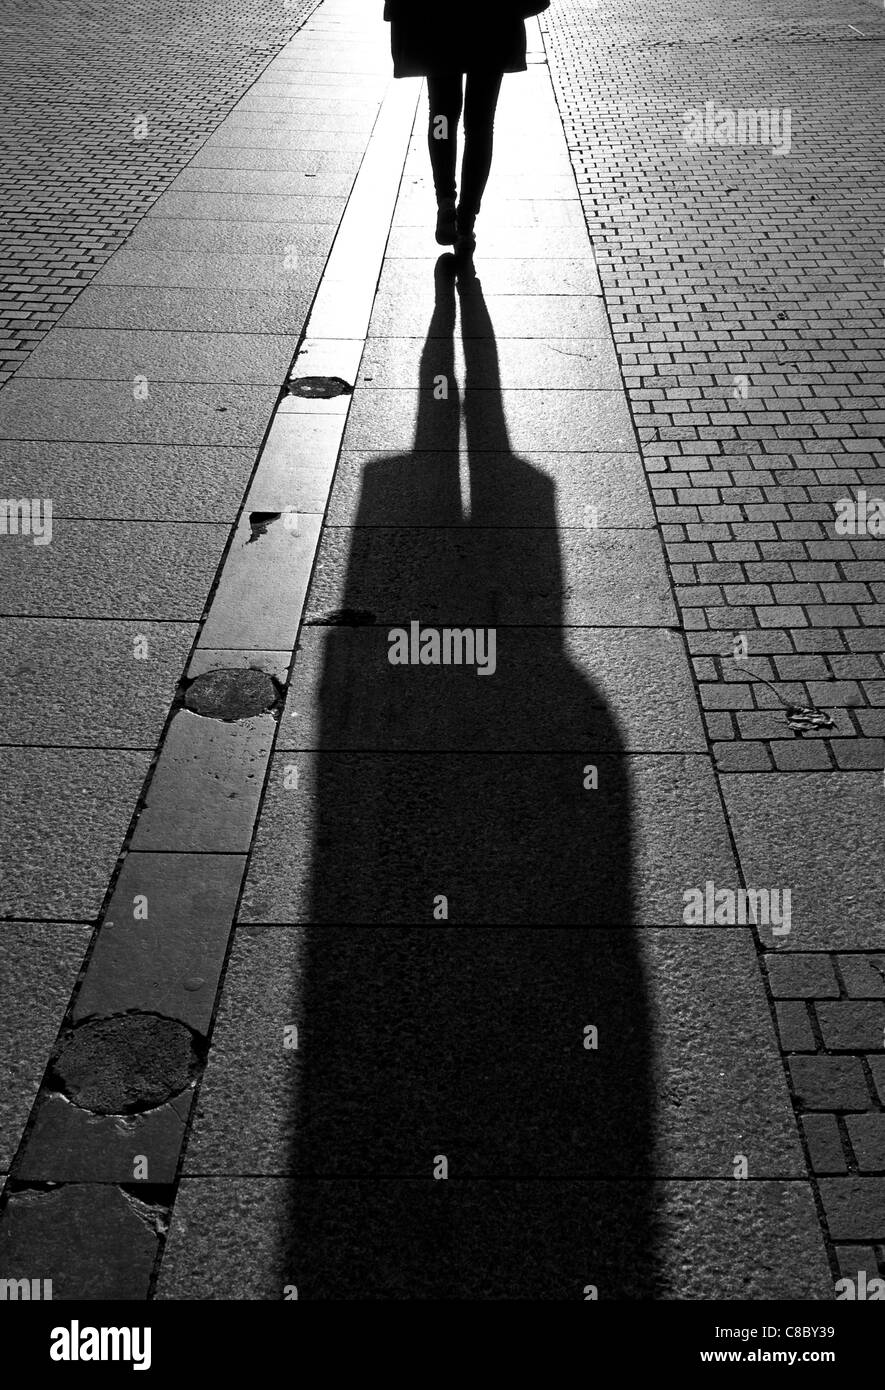 Woman walking on pavement with low sun casting a long shadow Stock Photo